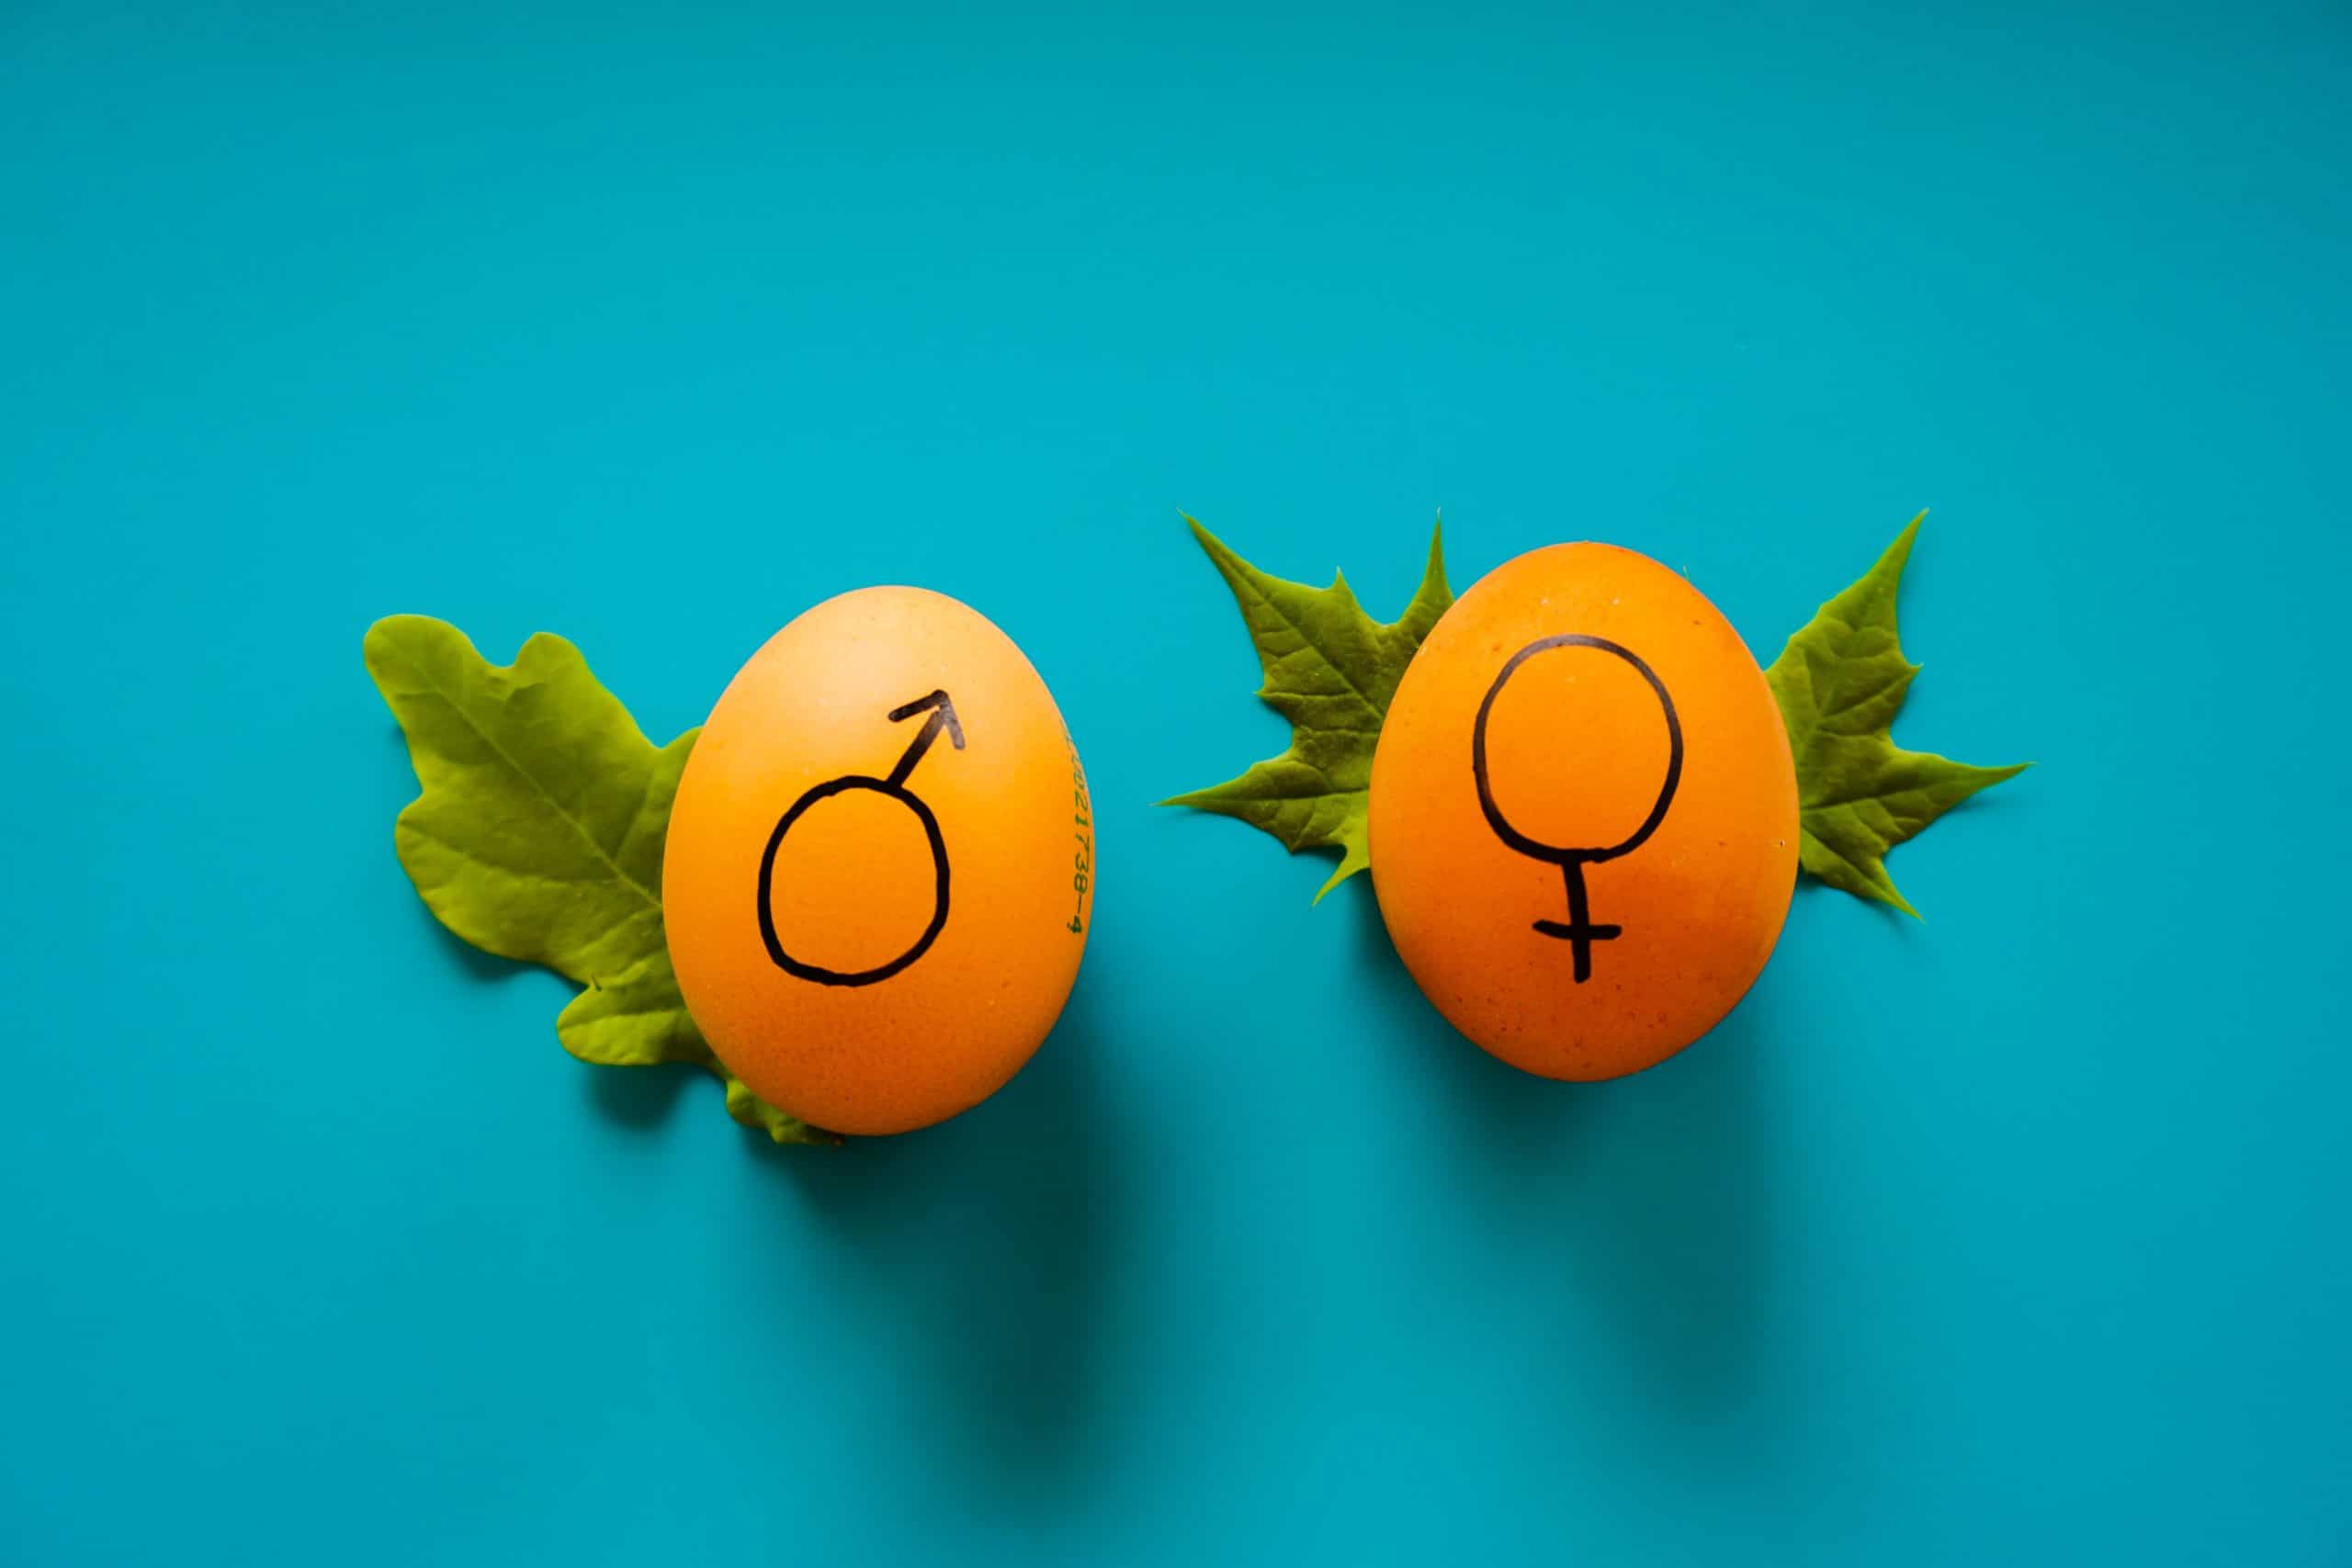 Does sex or gender of therapist matter